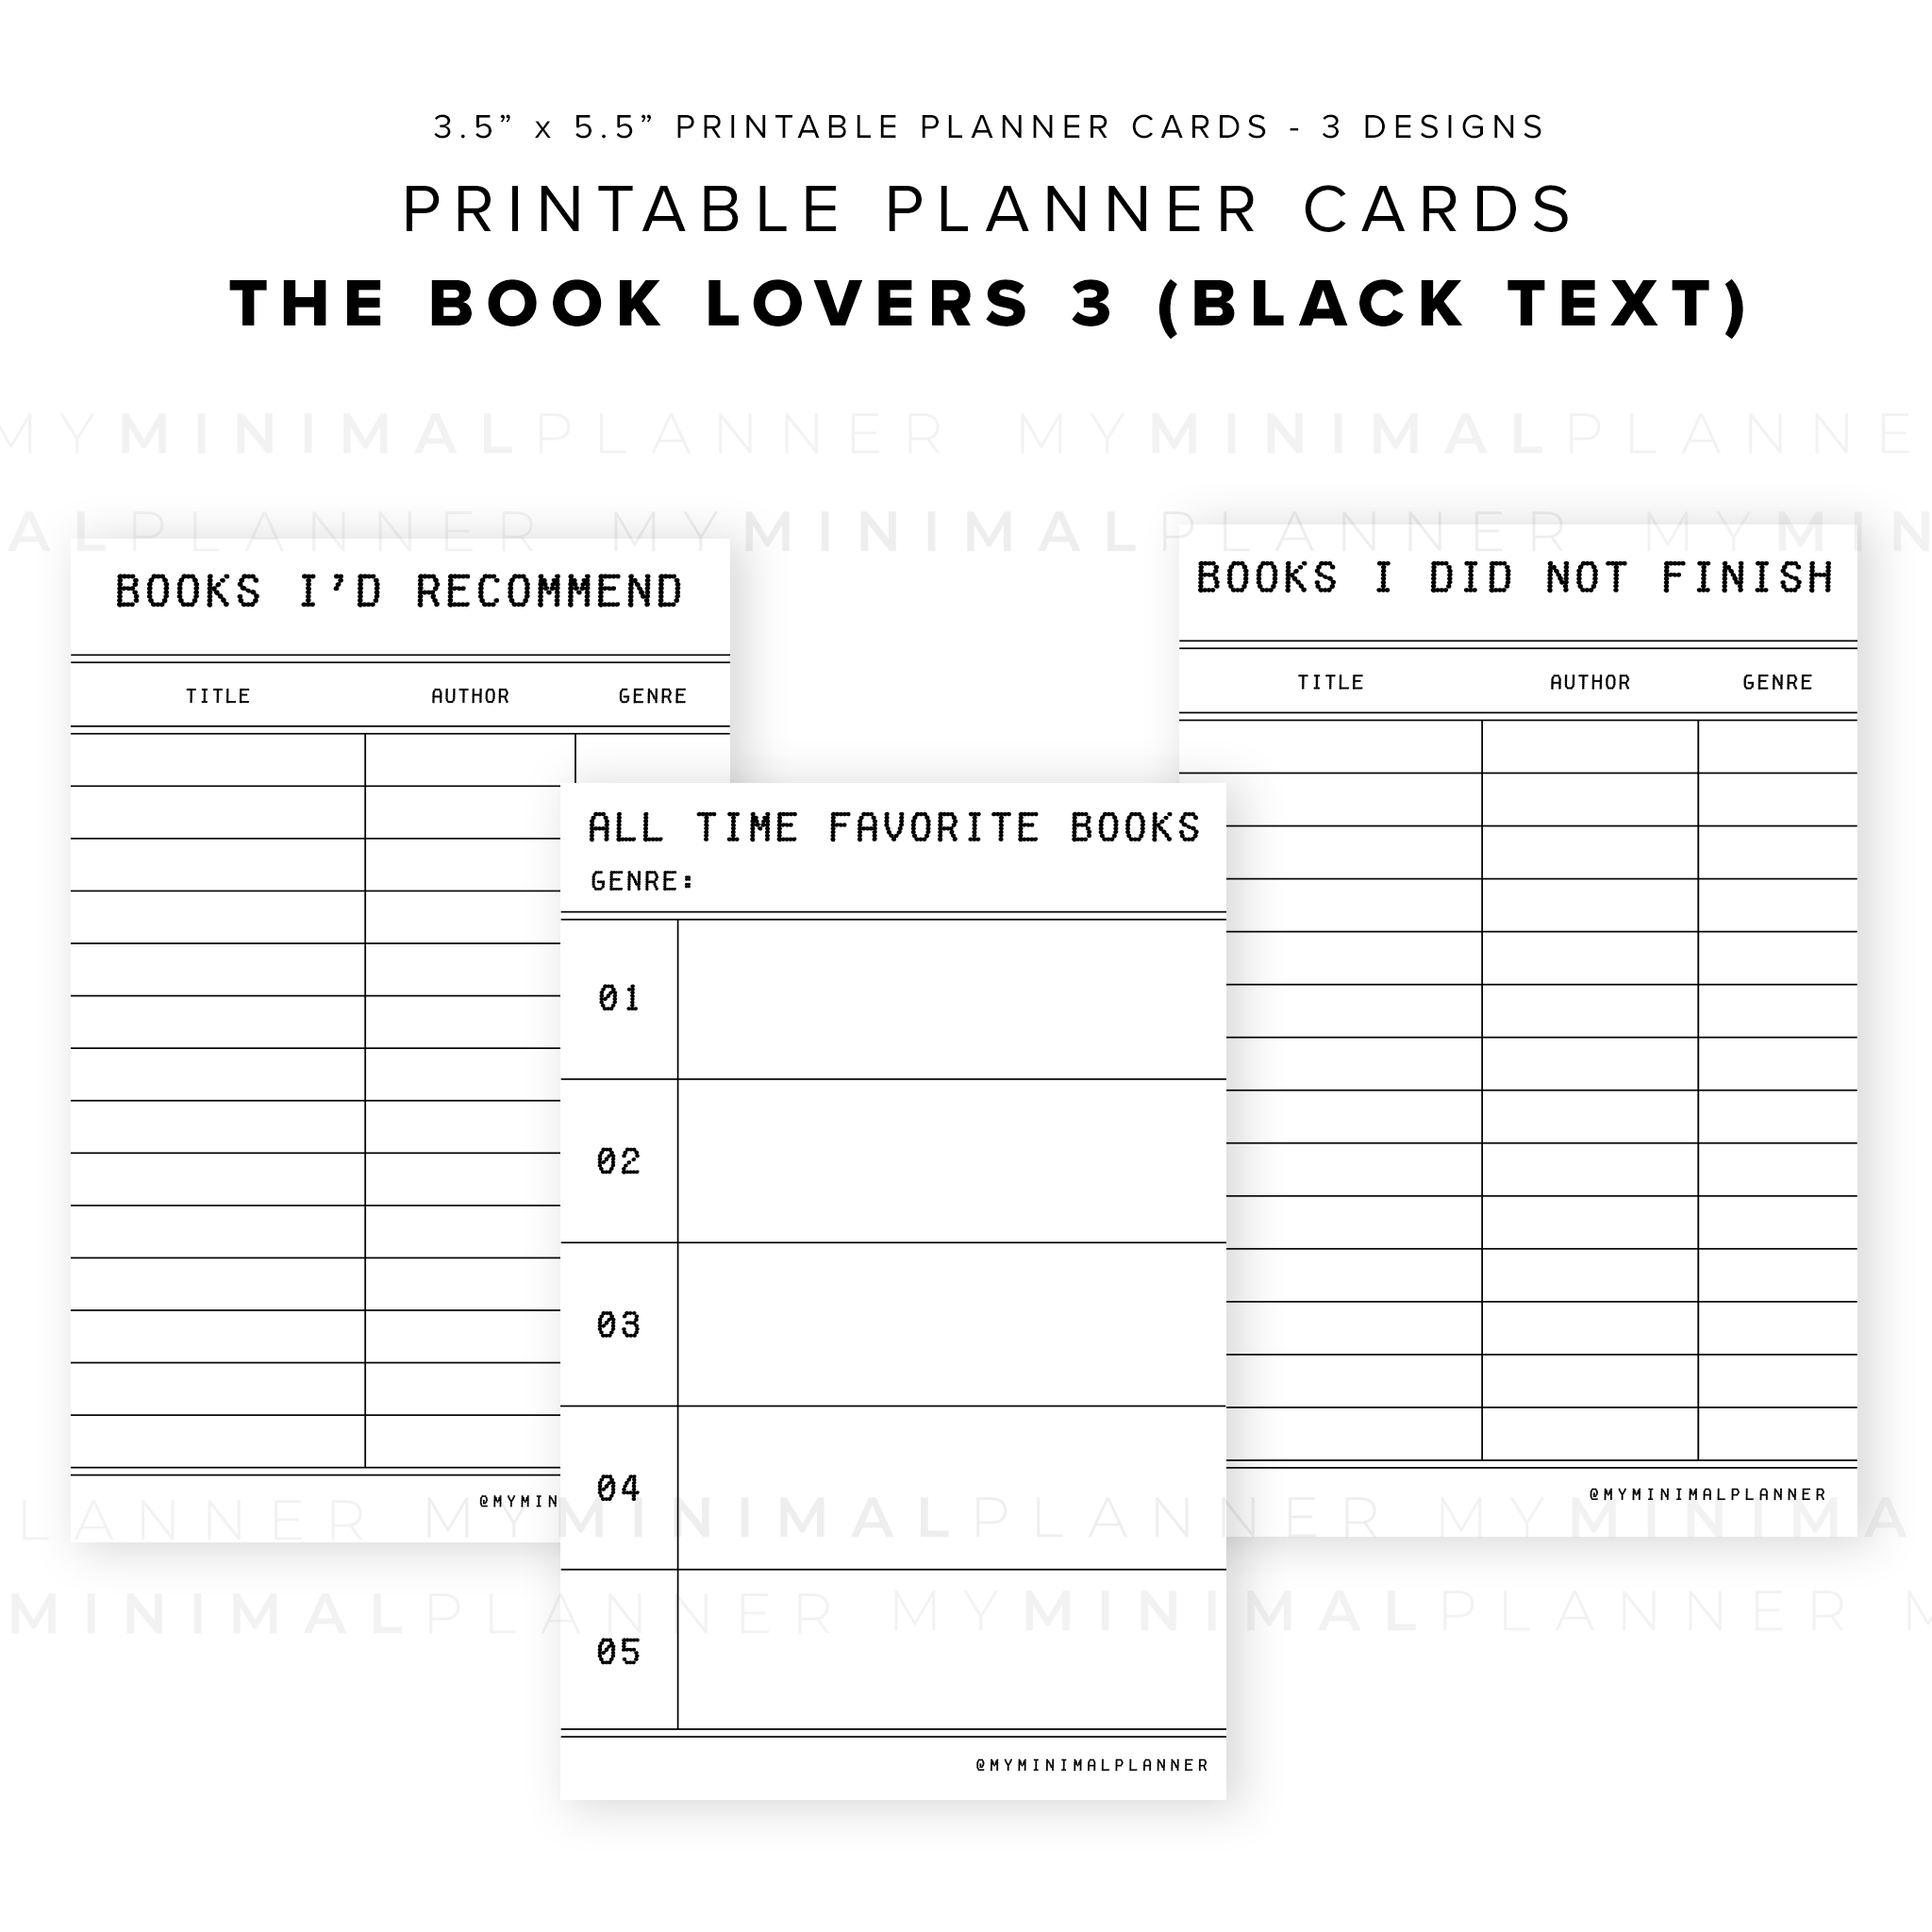 PPC11 - The Book Lovers 3 - Printable Planner Cards